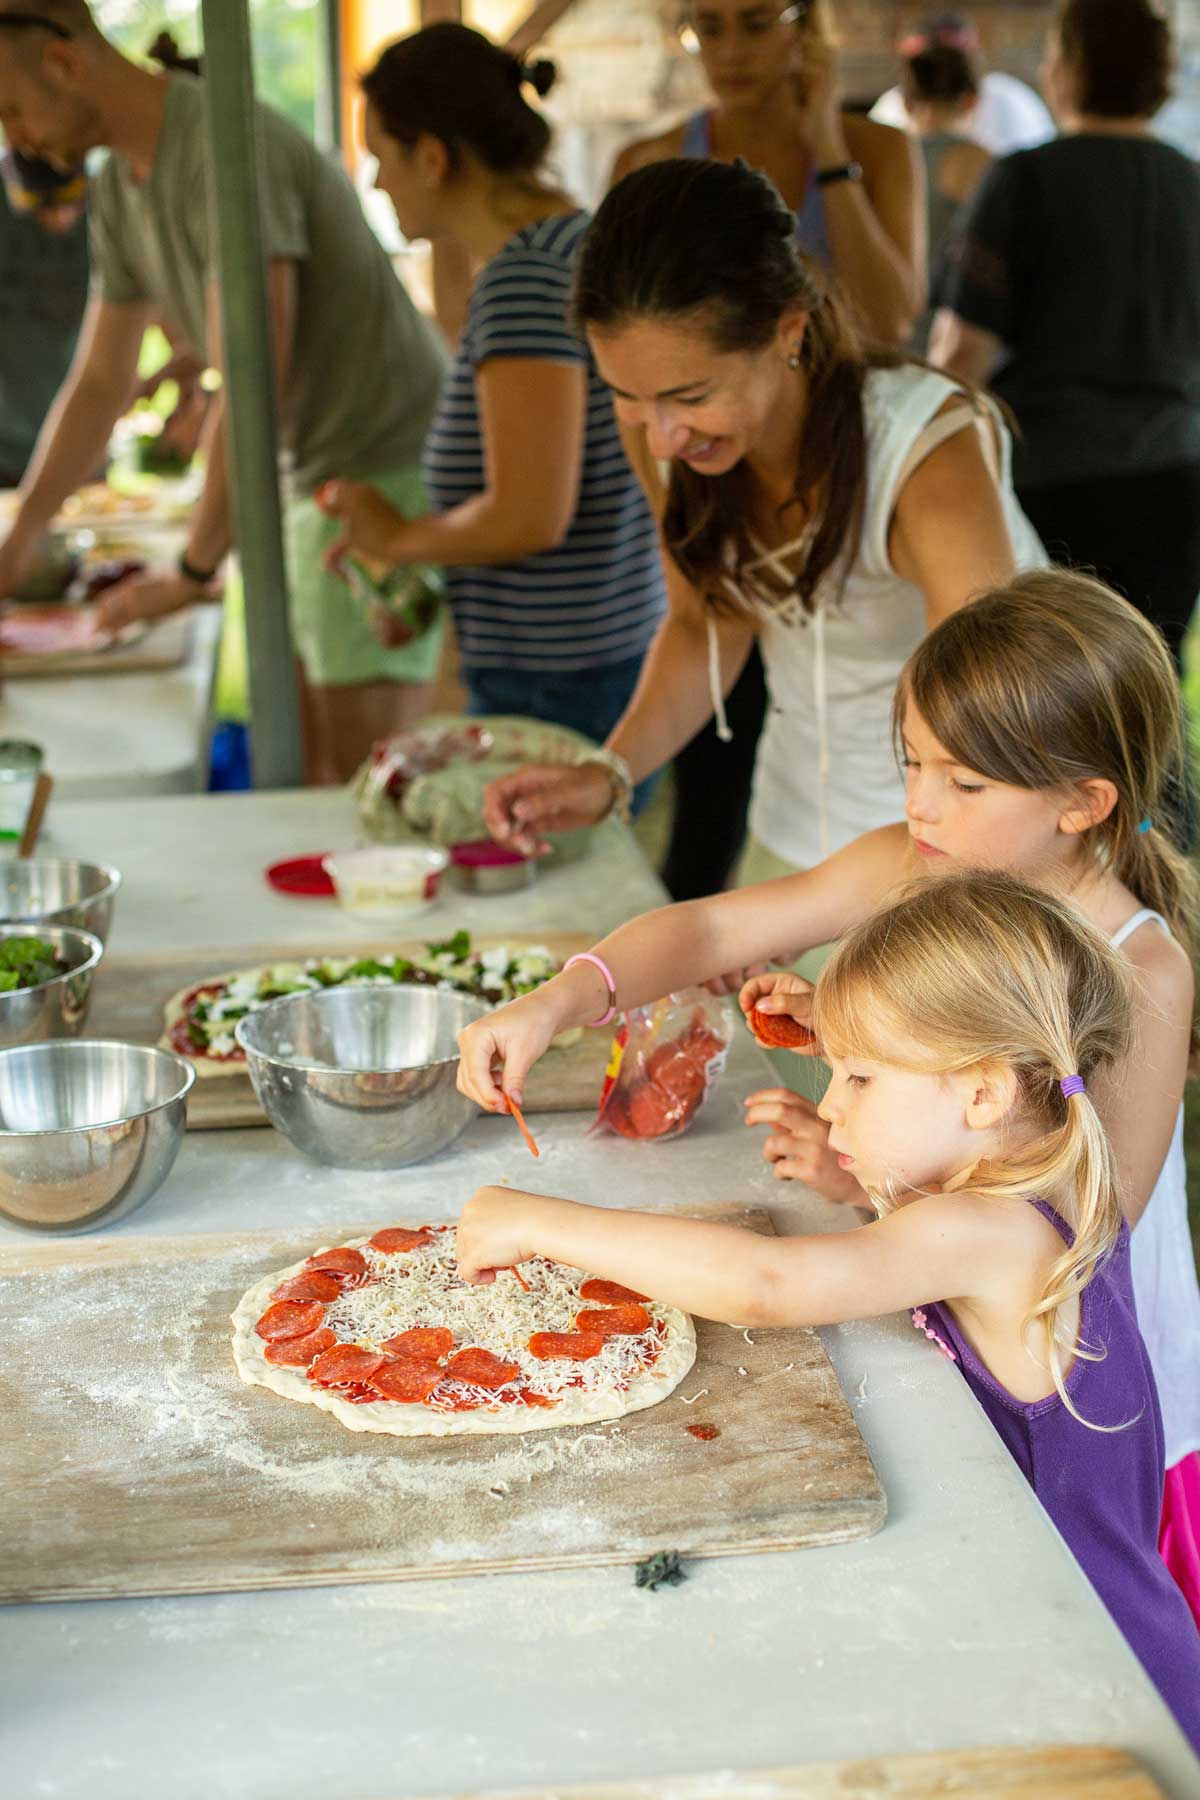 Two small children helping top a pizza before it goes into an outdoor oven